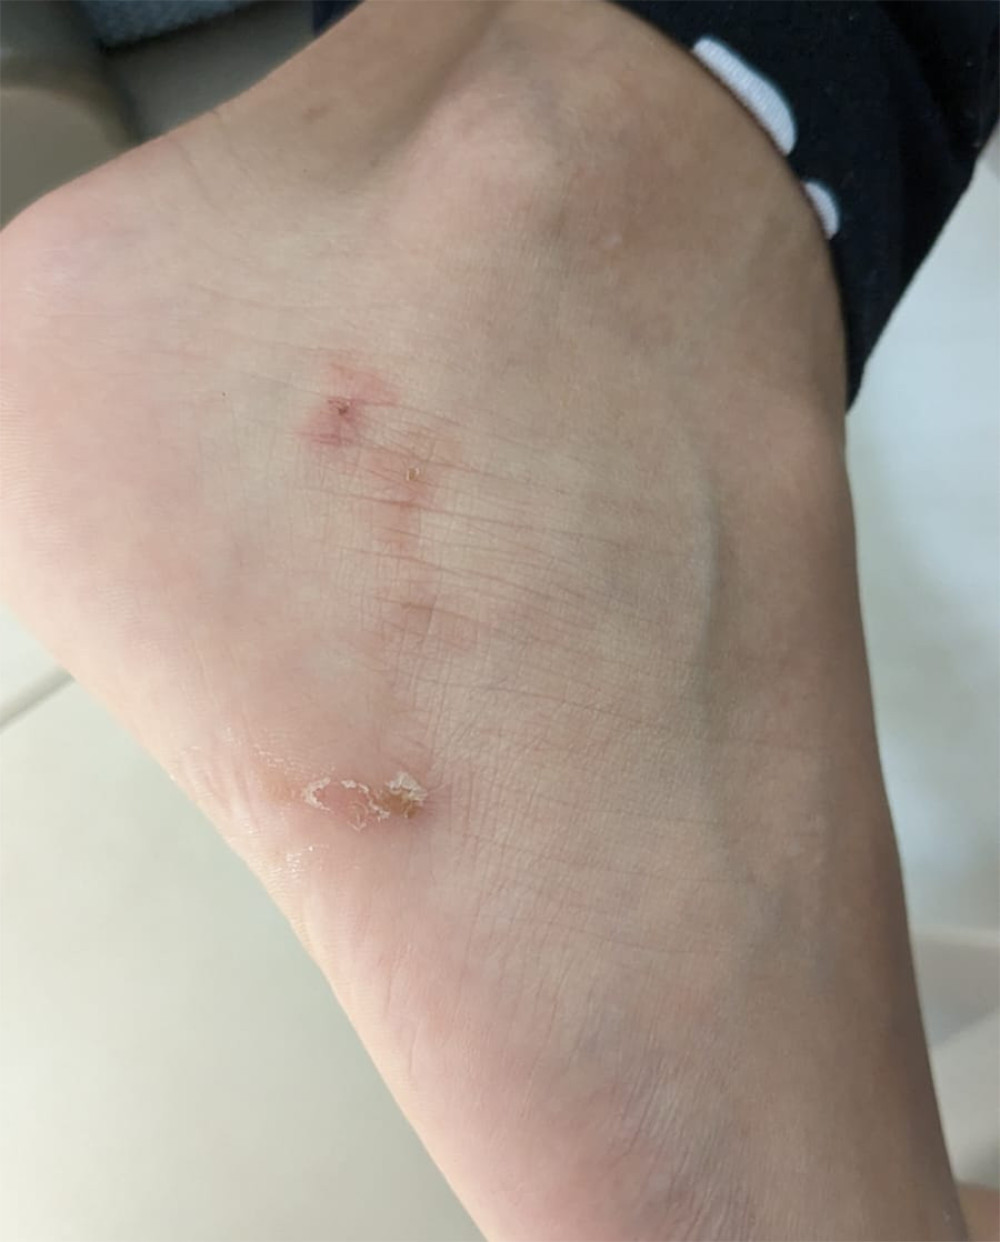 A 14-year-old boy with a palpable serginous lesion on his right foot was diagnosed with cutaneous larva migrans (MCI). (Taken by the authors).